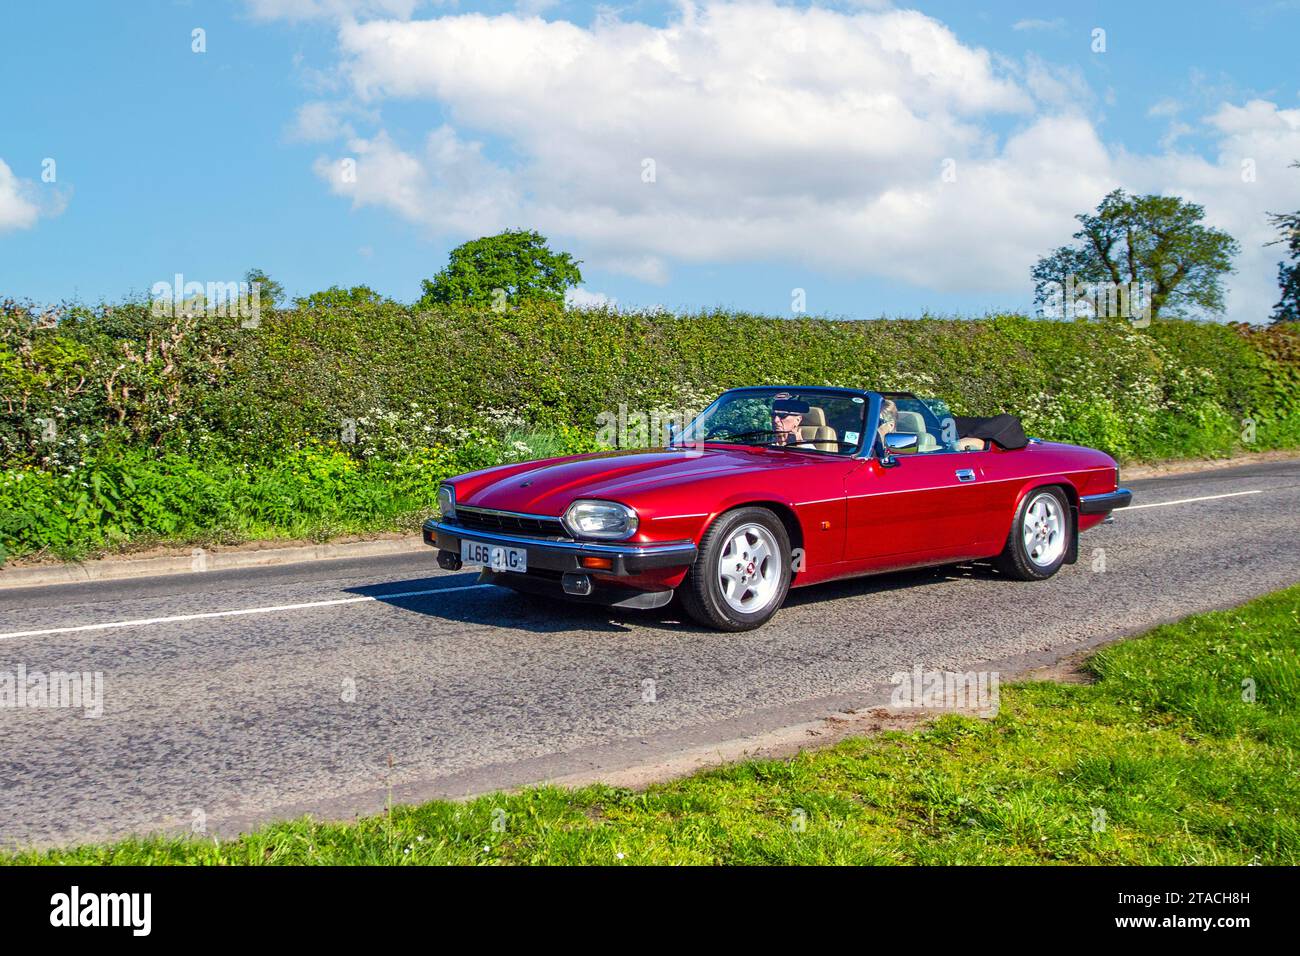 1993 90s nineties Red British Jaguar Xj-S Convertible Auto,  7.0 litre V12; Vintage, restored classic motors, automobile collectors motoring enthusiasts, historic veteran cars travelling in Cheshire, UK Stock Photo